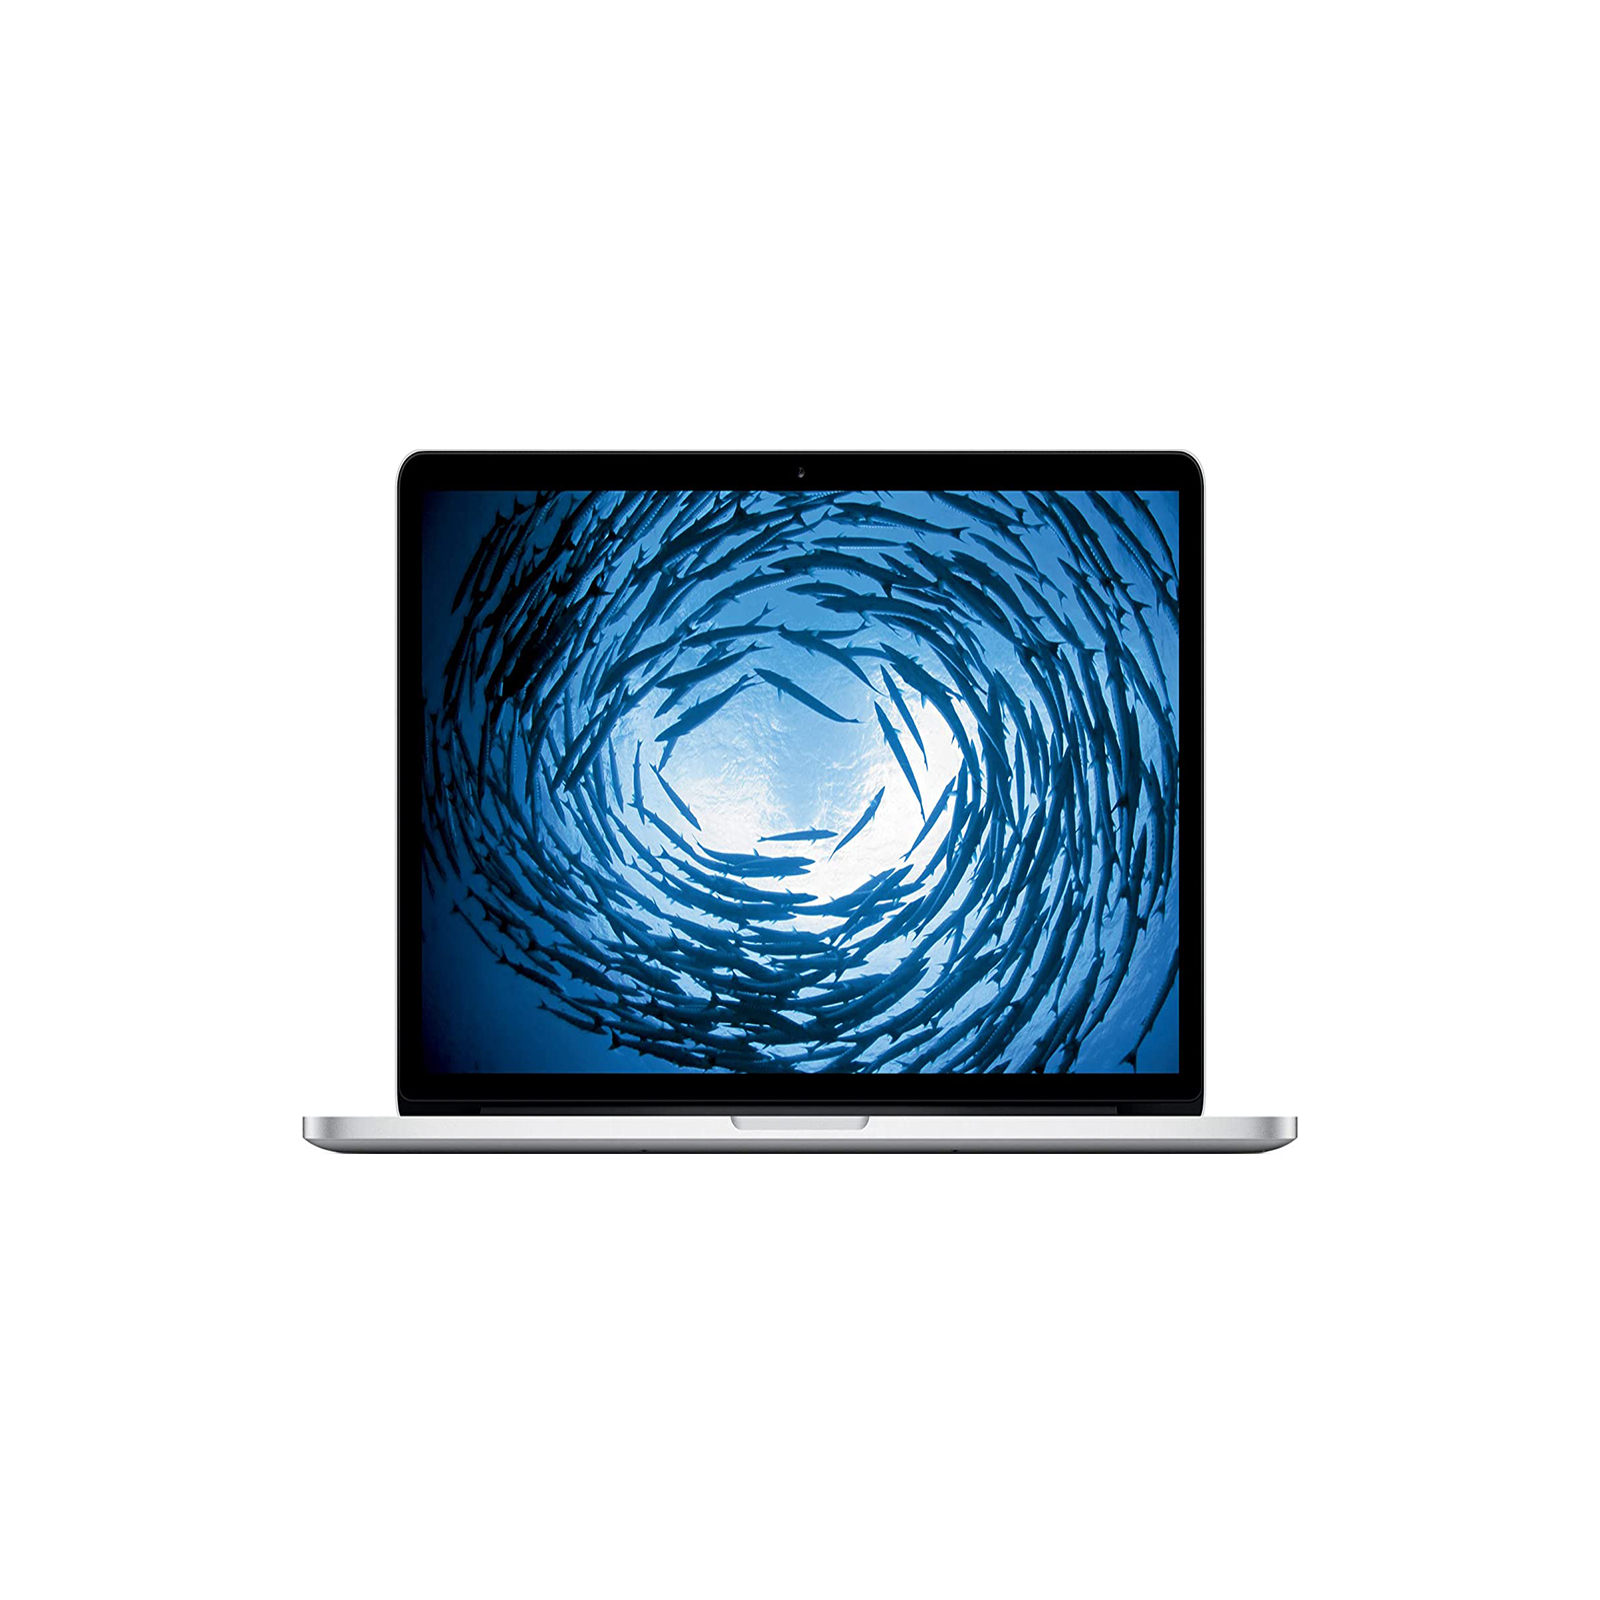 Macbook Pro 15" Late 2013 [Core i7 2.3Ghz] [16GB RAM] [256GB SSD] [Excellent] [12M]